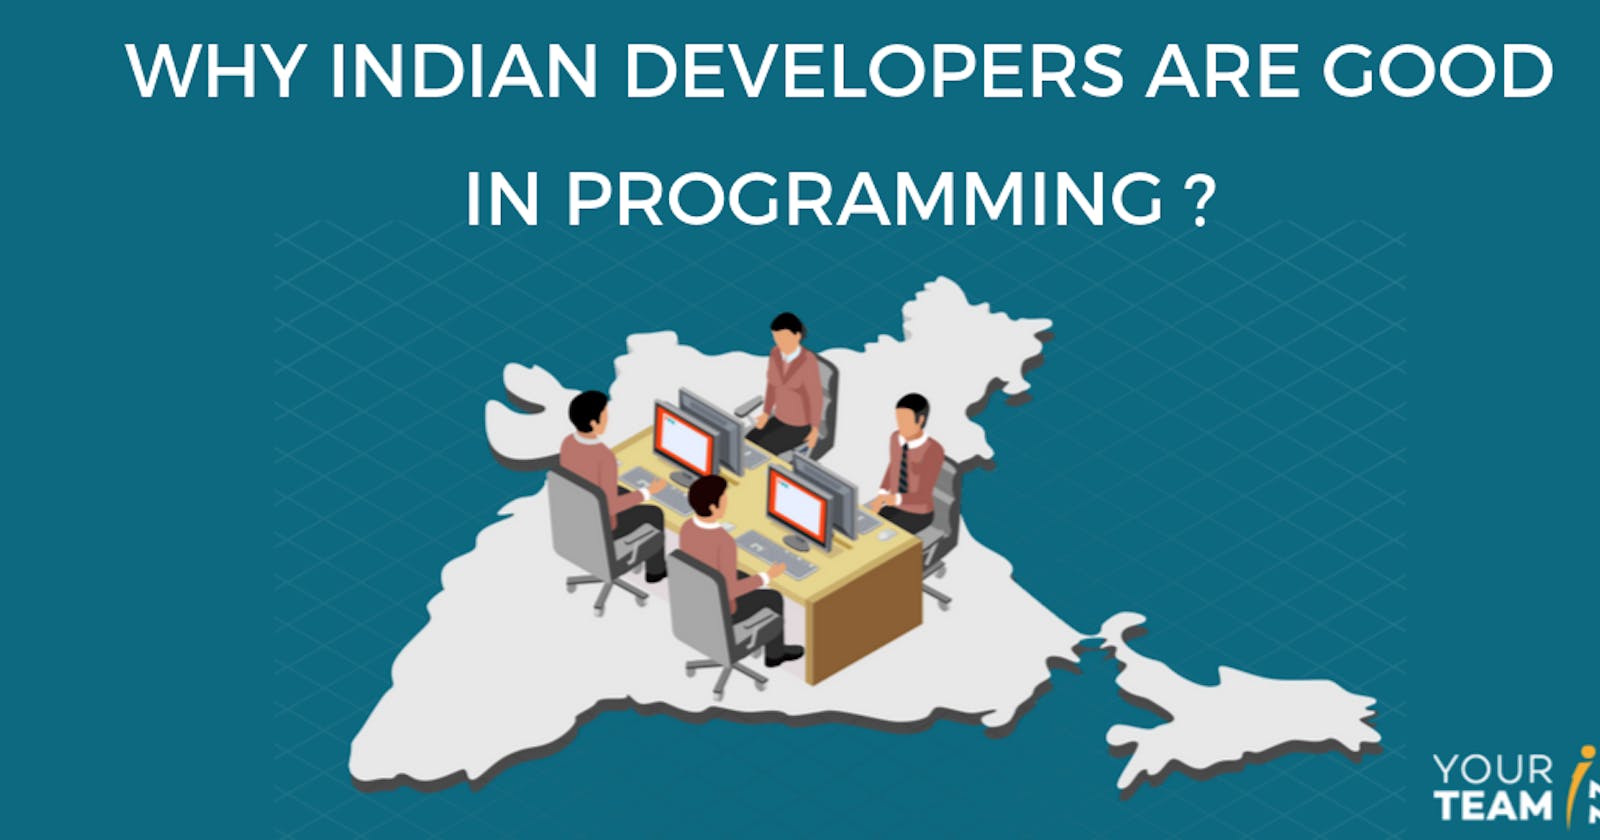 Why are Indian Programmers Good to Hire for Programming?